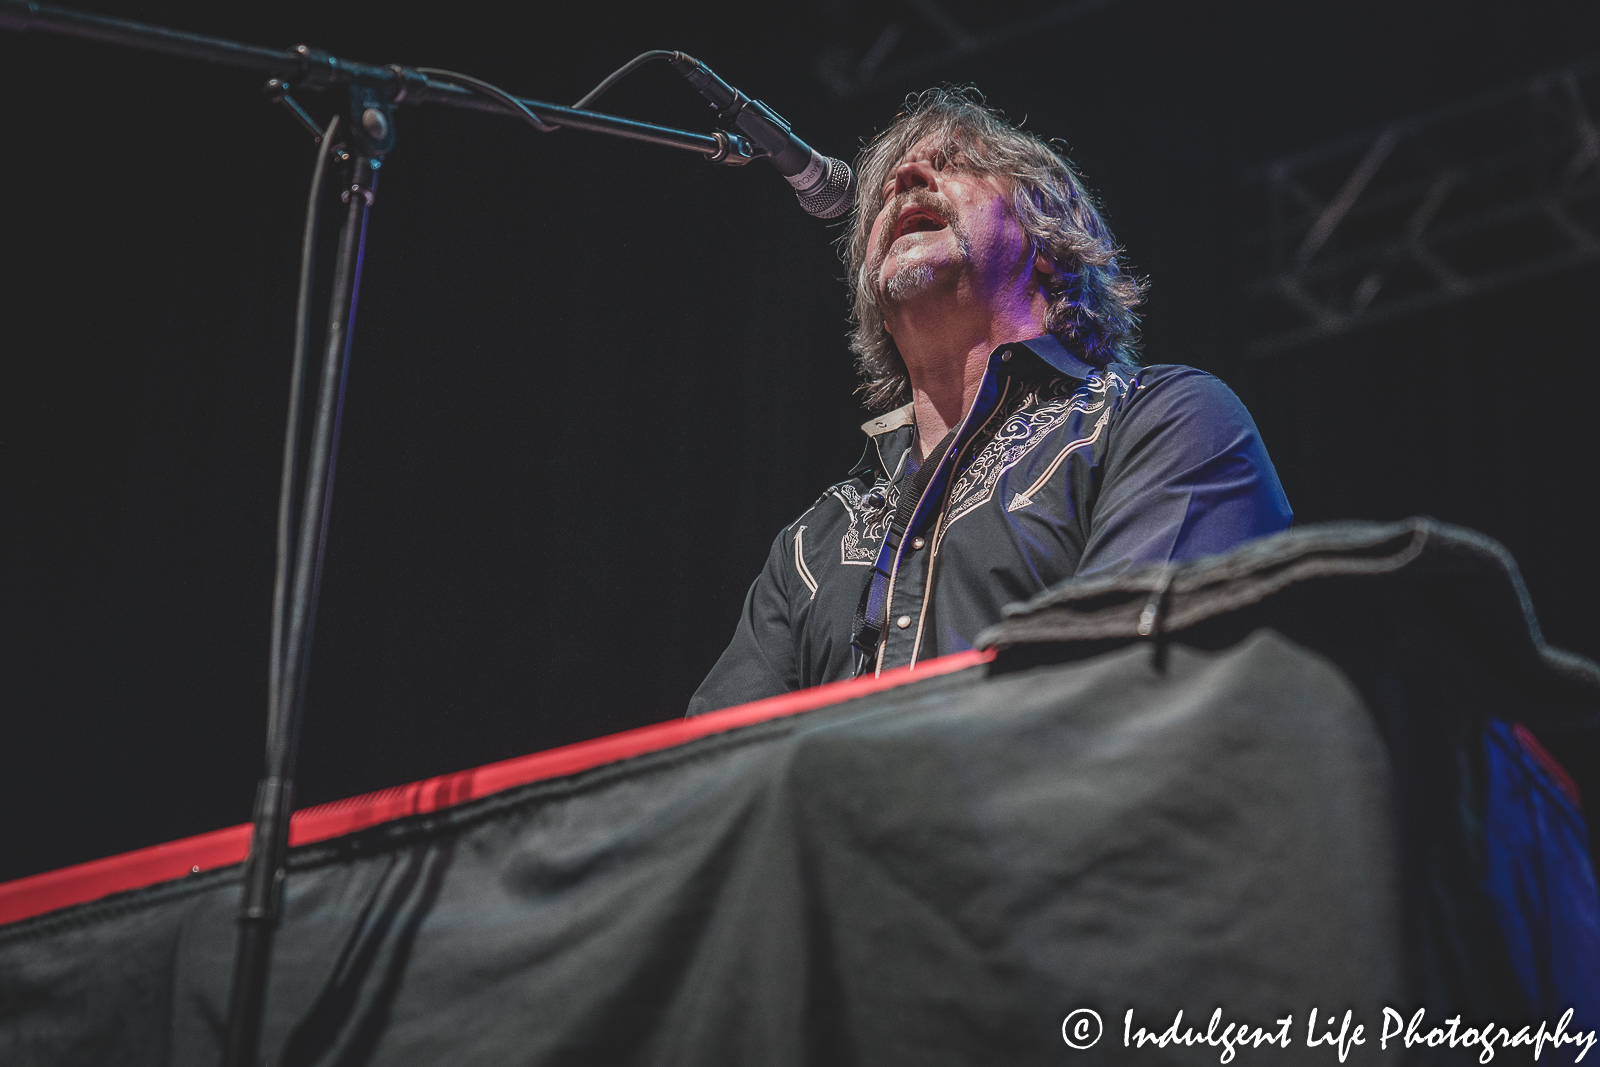 The Marshall Tucker Band member Marcus James Henderson playing the keyboard and singing live at Ameristar Casino in Kansas City, MO on October 28, 2022.